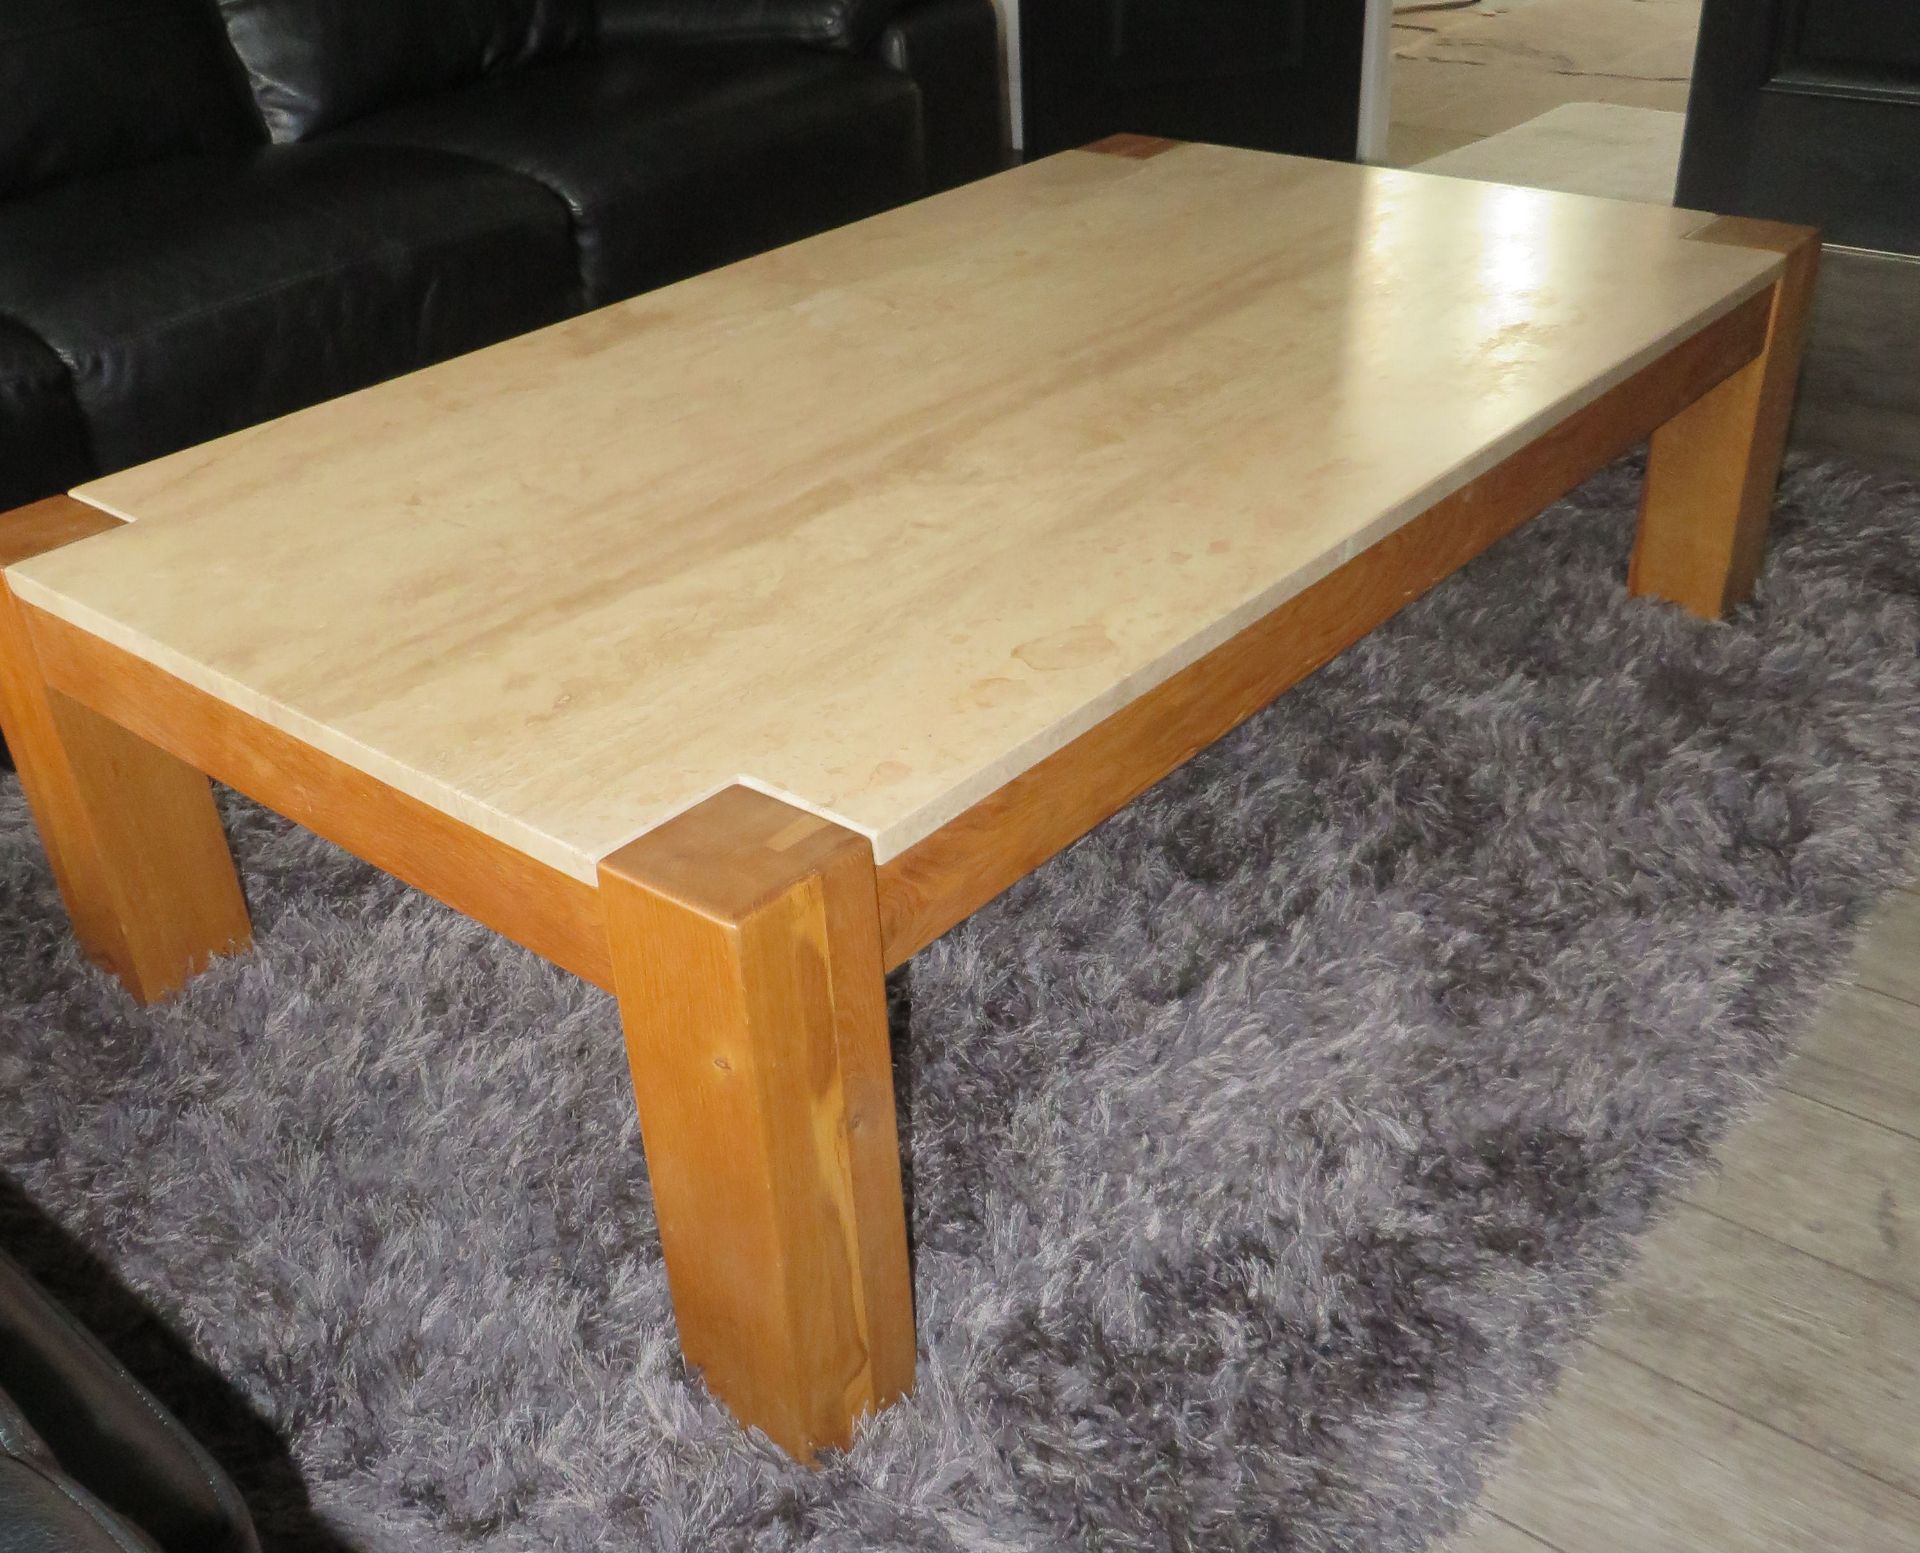 1 x Contemporary Oak and Travertine Coffee Table - CL175 - Location: Altrincham WA14 - NO VAT ON THE - Image 7 of 7